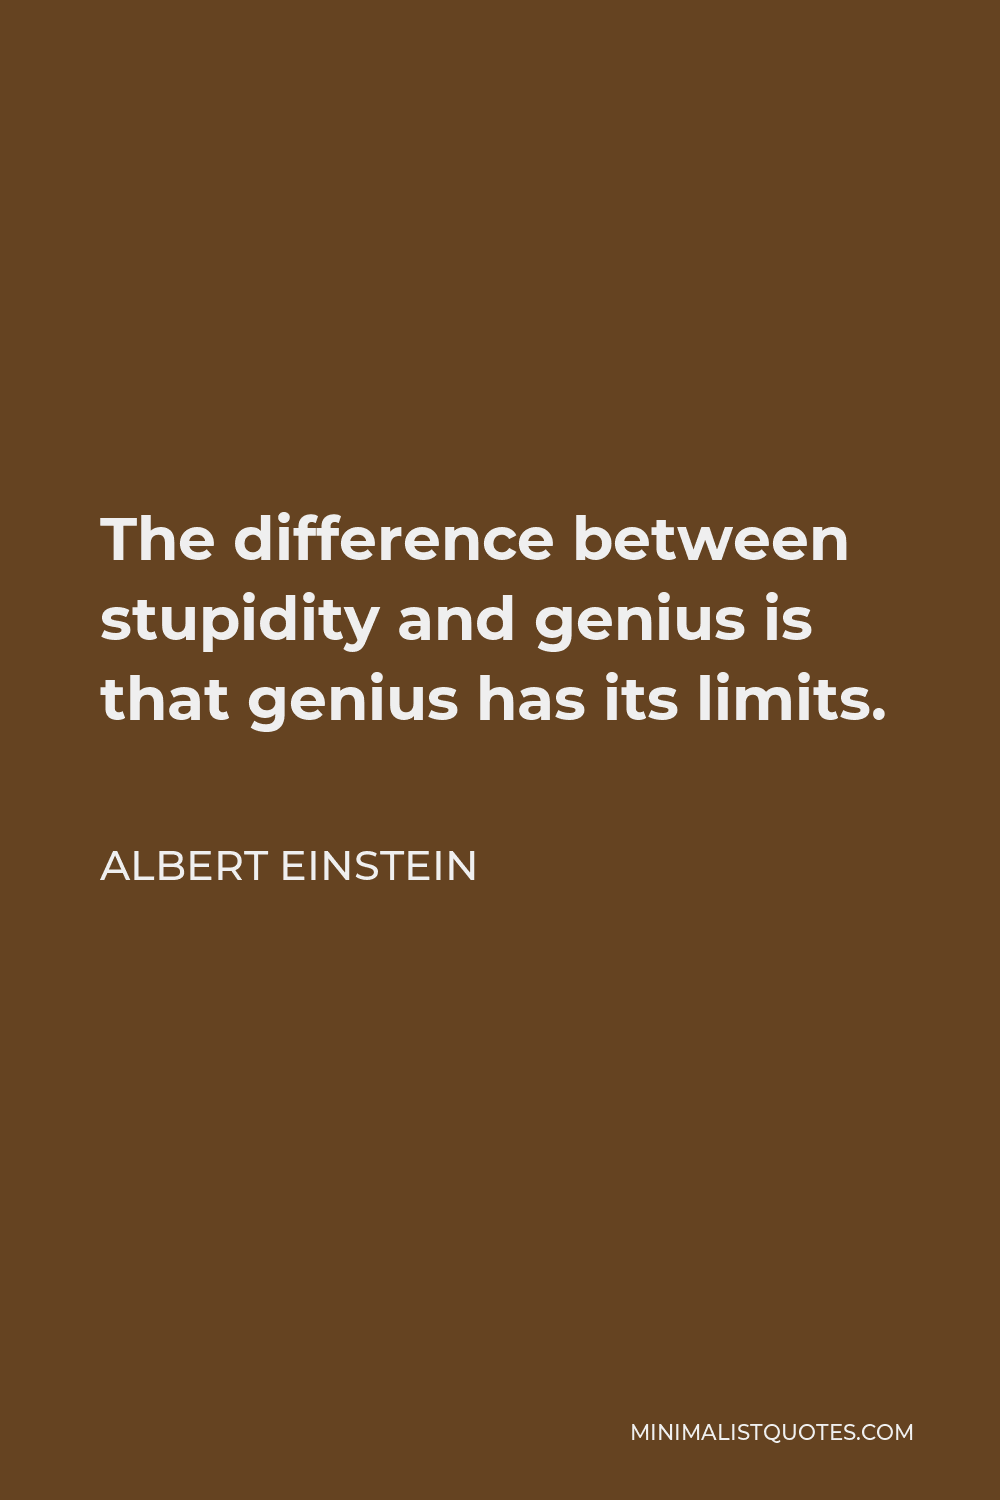 Albert Einstein Quote - The difference between stupidity and genius is that genius has its limits.